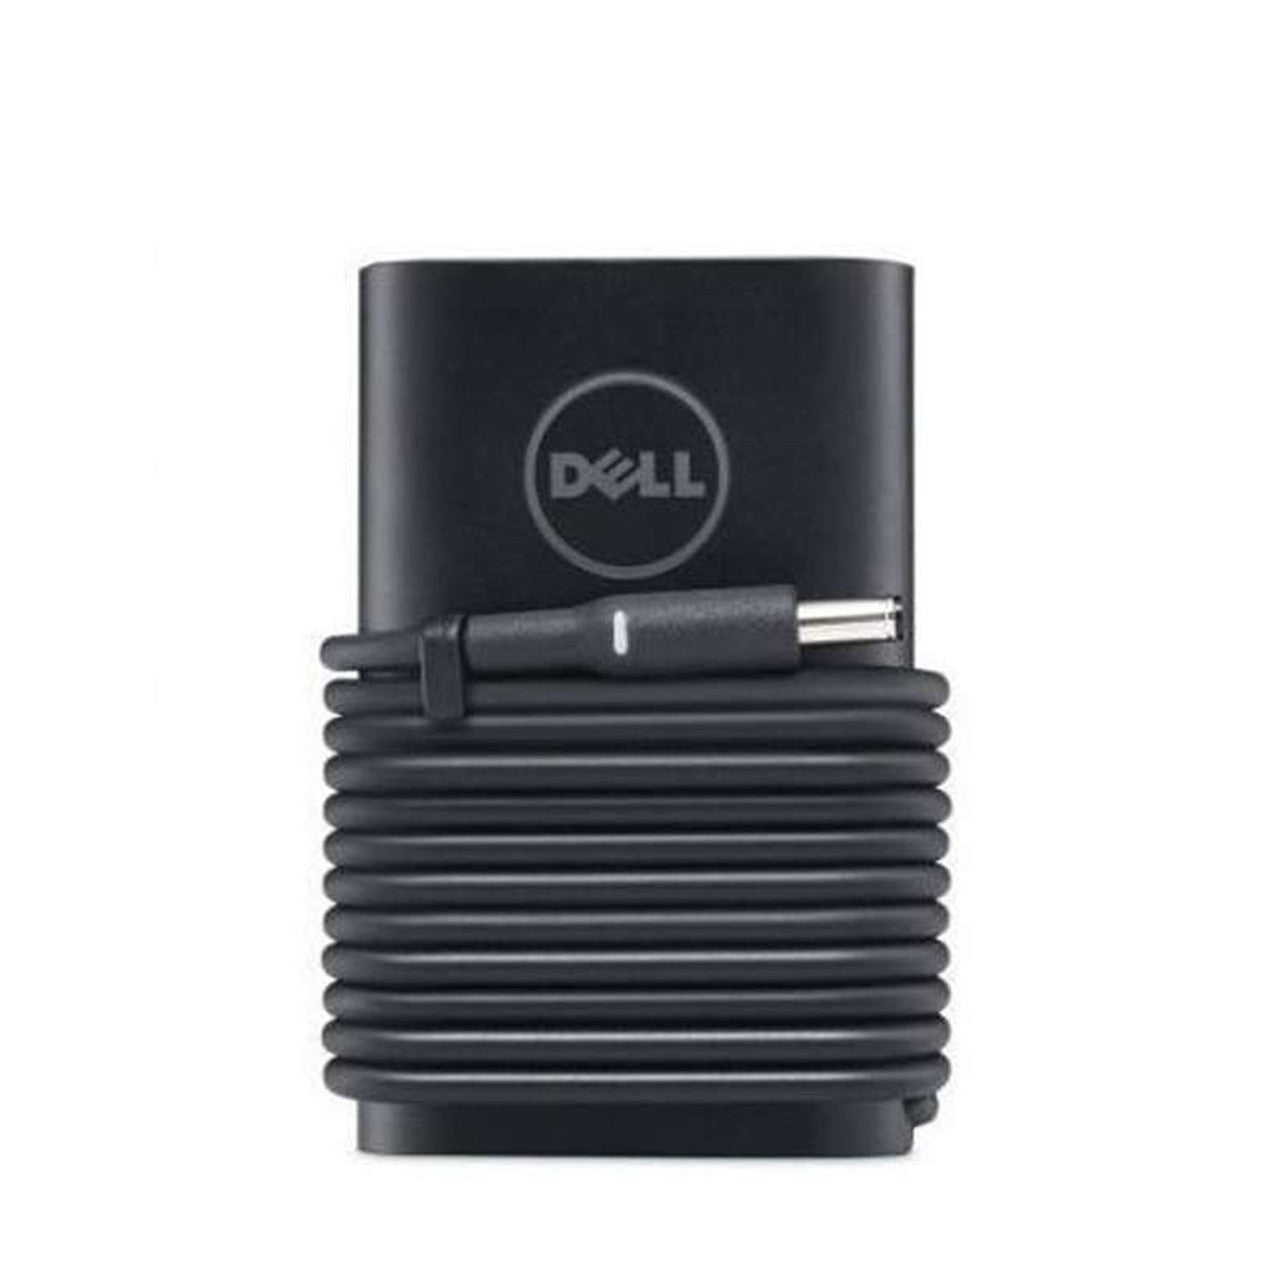 Dell Slim Power Adapter – 130 Watt with 3 ft. Power Cord Output power: 19.5V 6.67A 4.5 X 3.0 130W